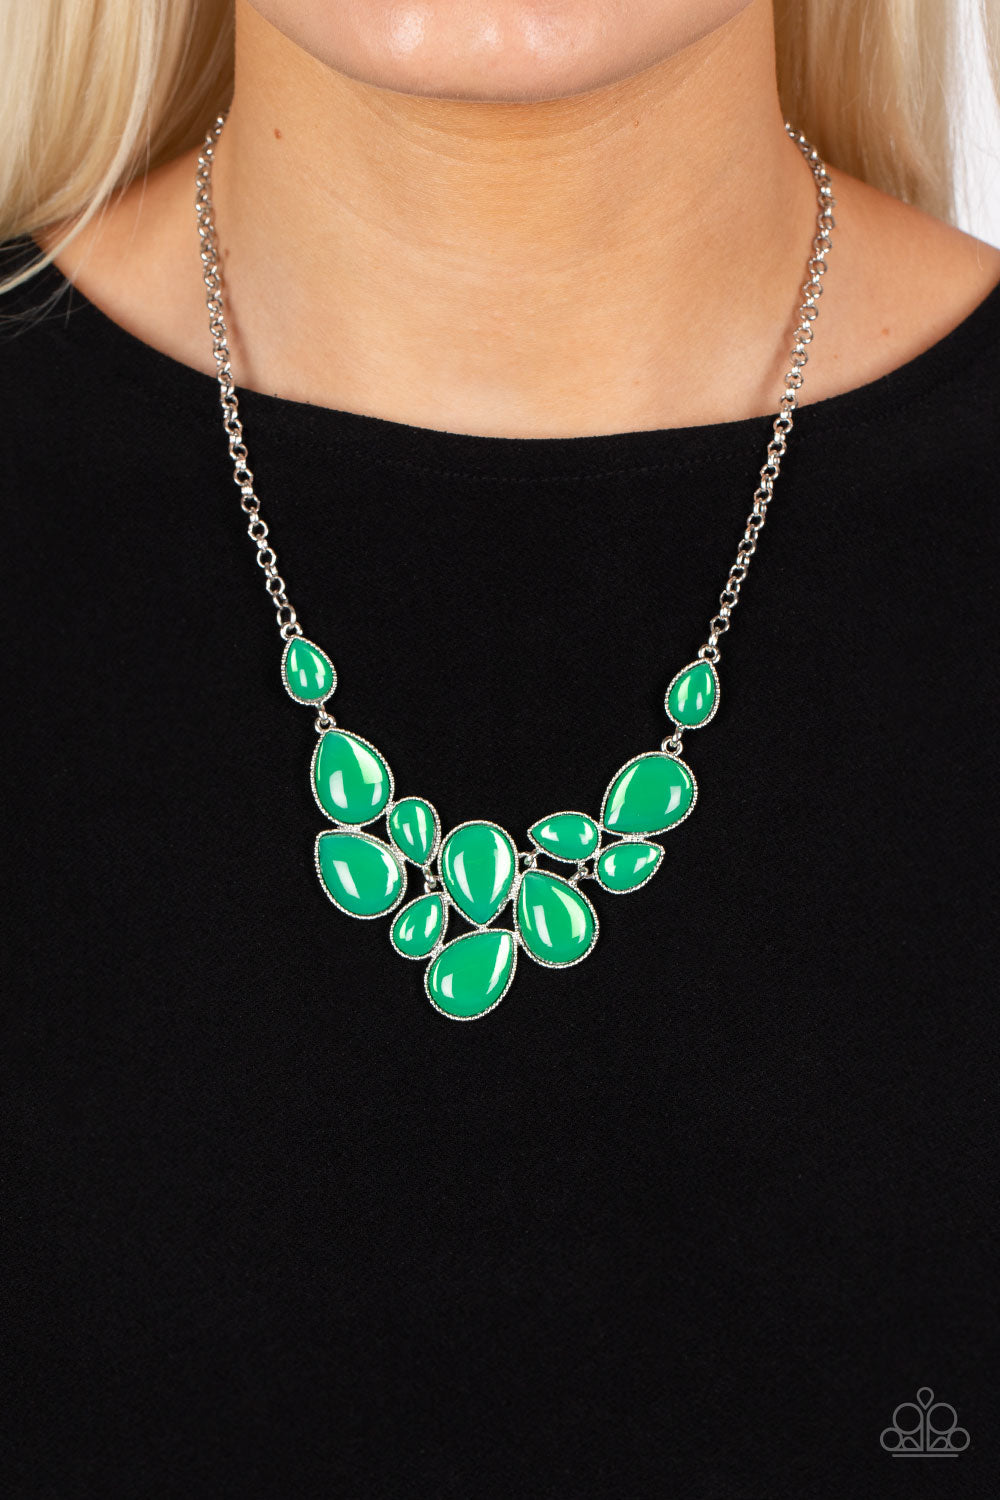 Paparazzi - Keeps GLOWING and GLOWING - Green Necklace